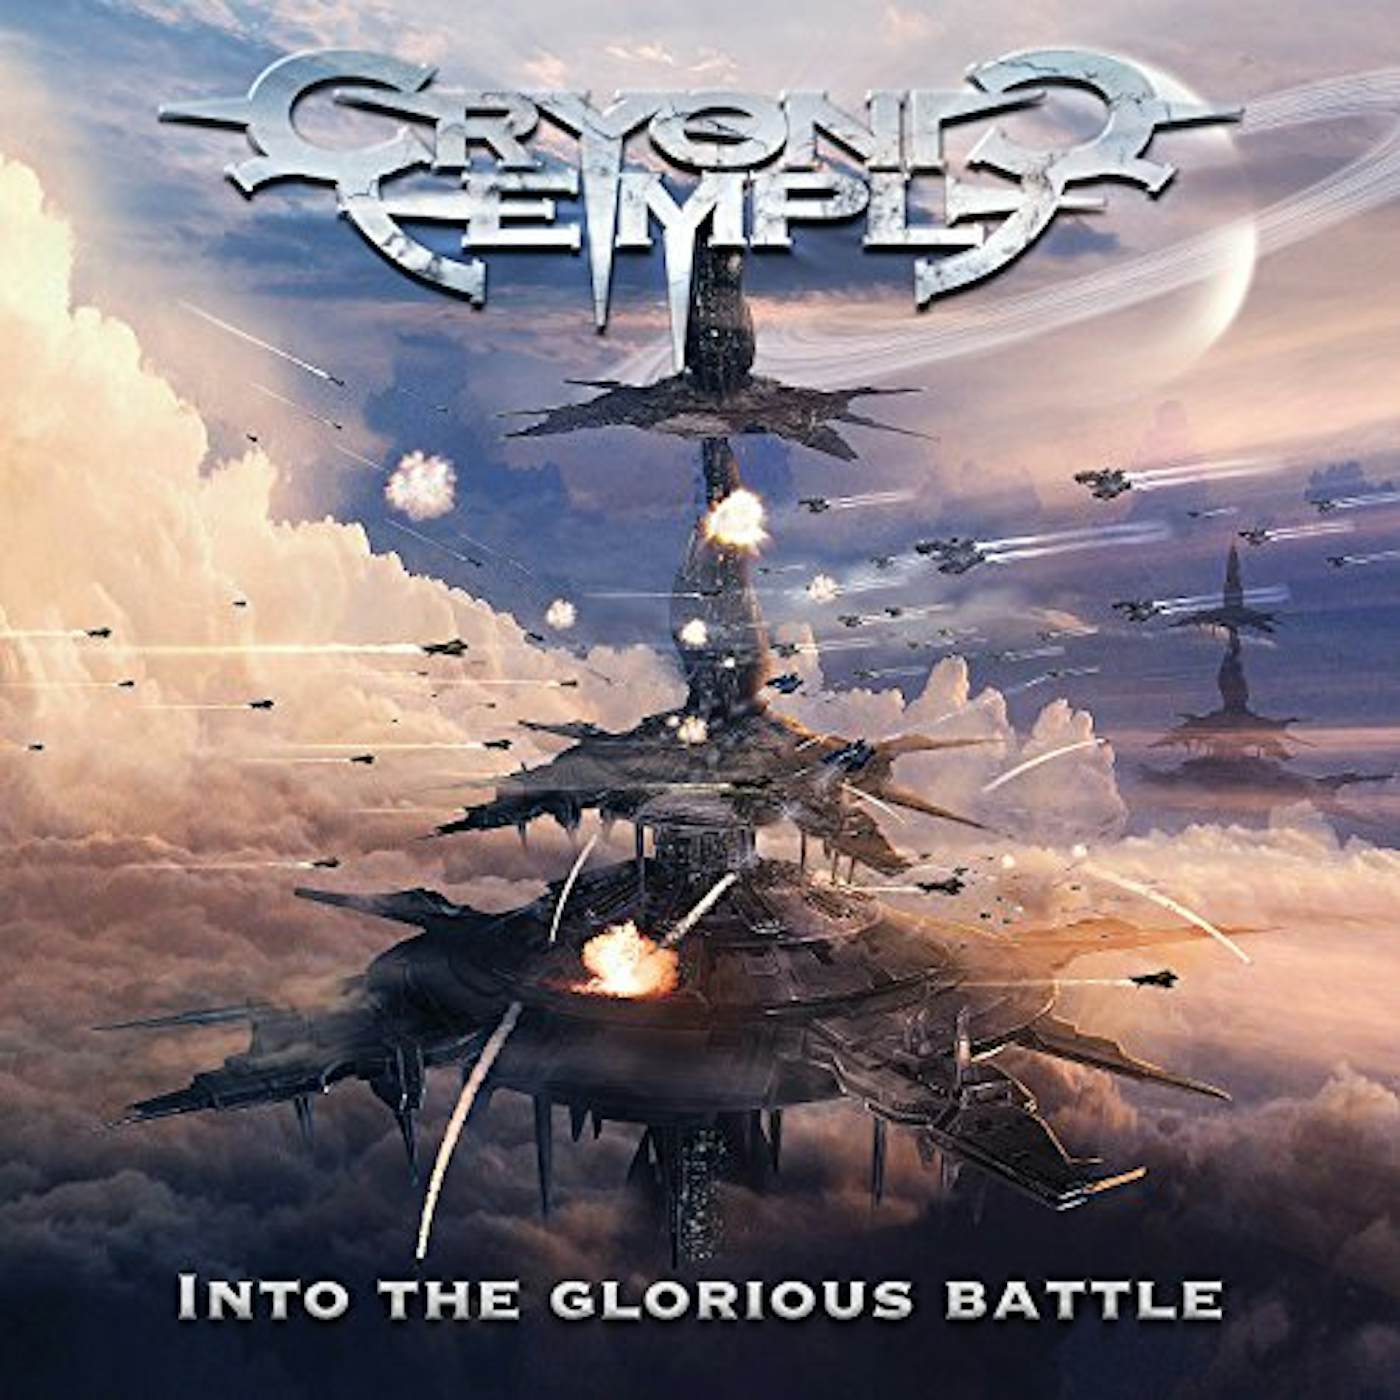 Cryonic Temple INTO THE GLORIOUS BATTLE CD